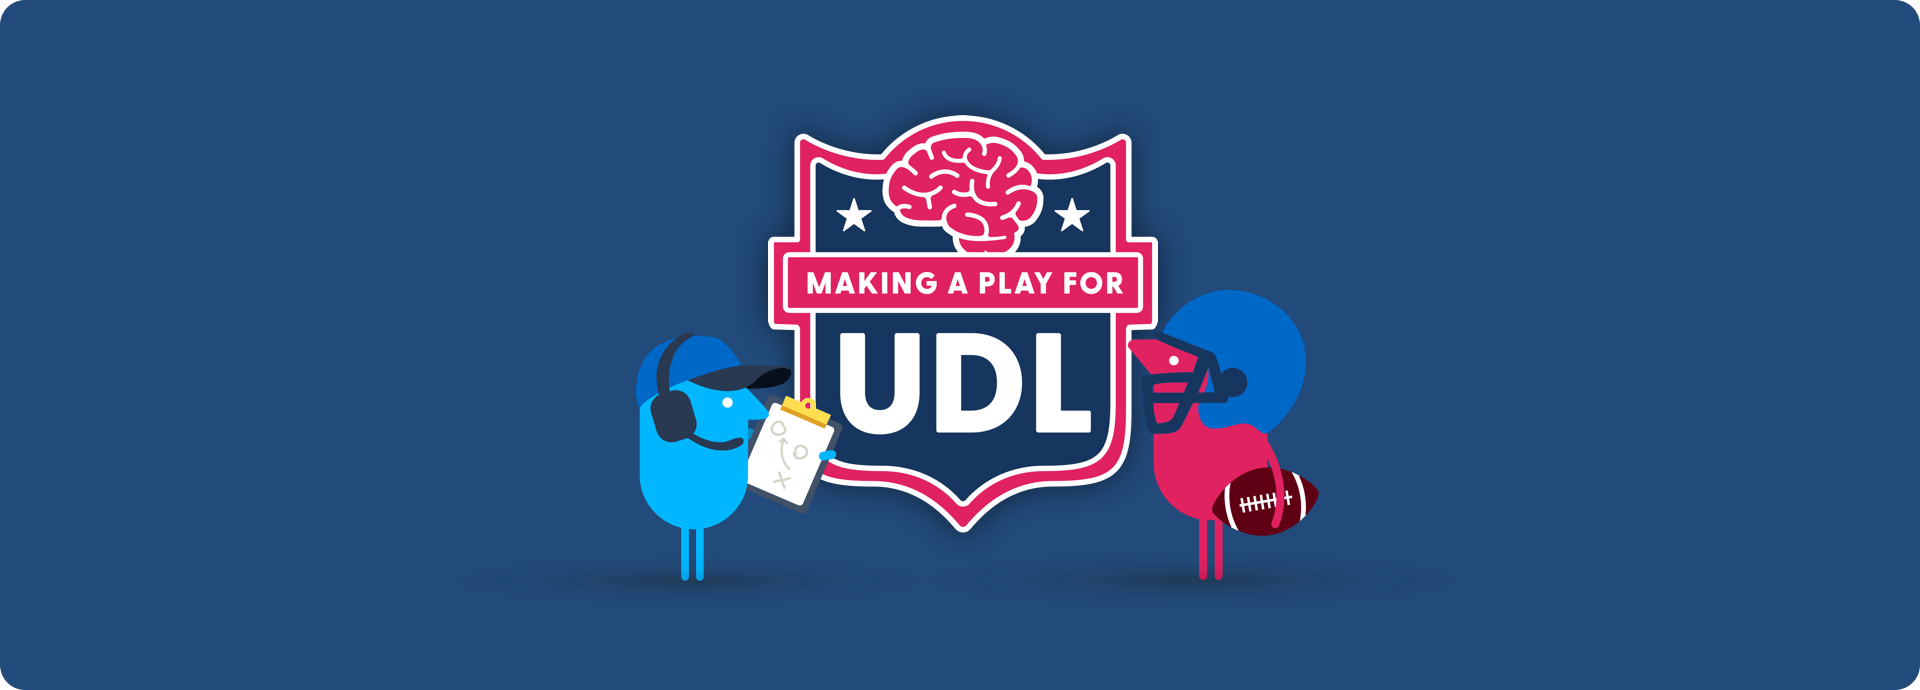 Making a Play for UDL Banner